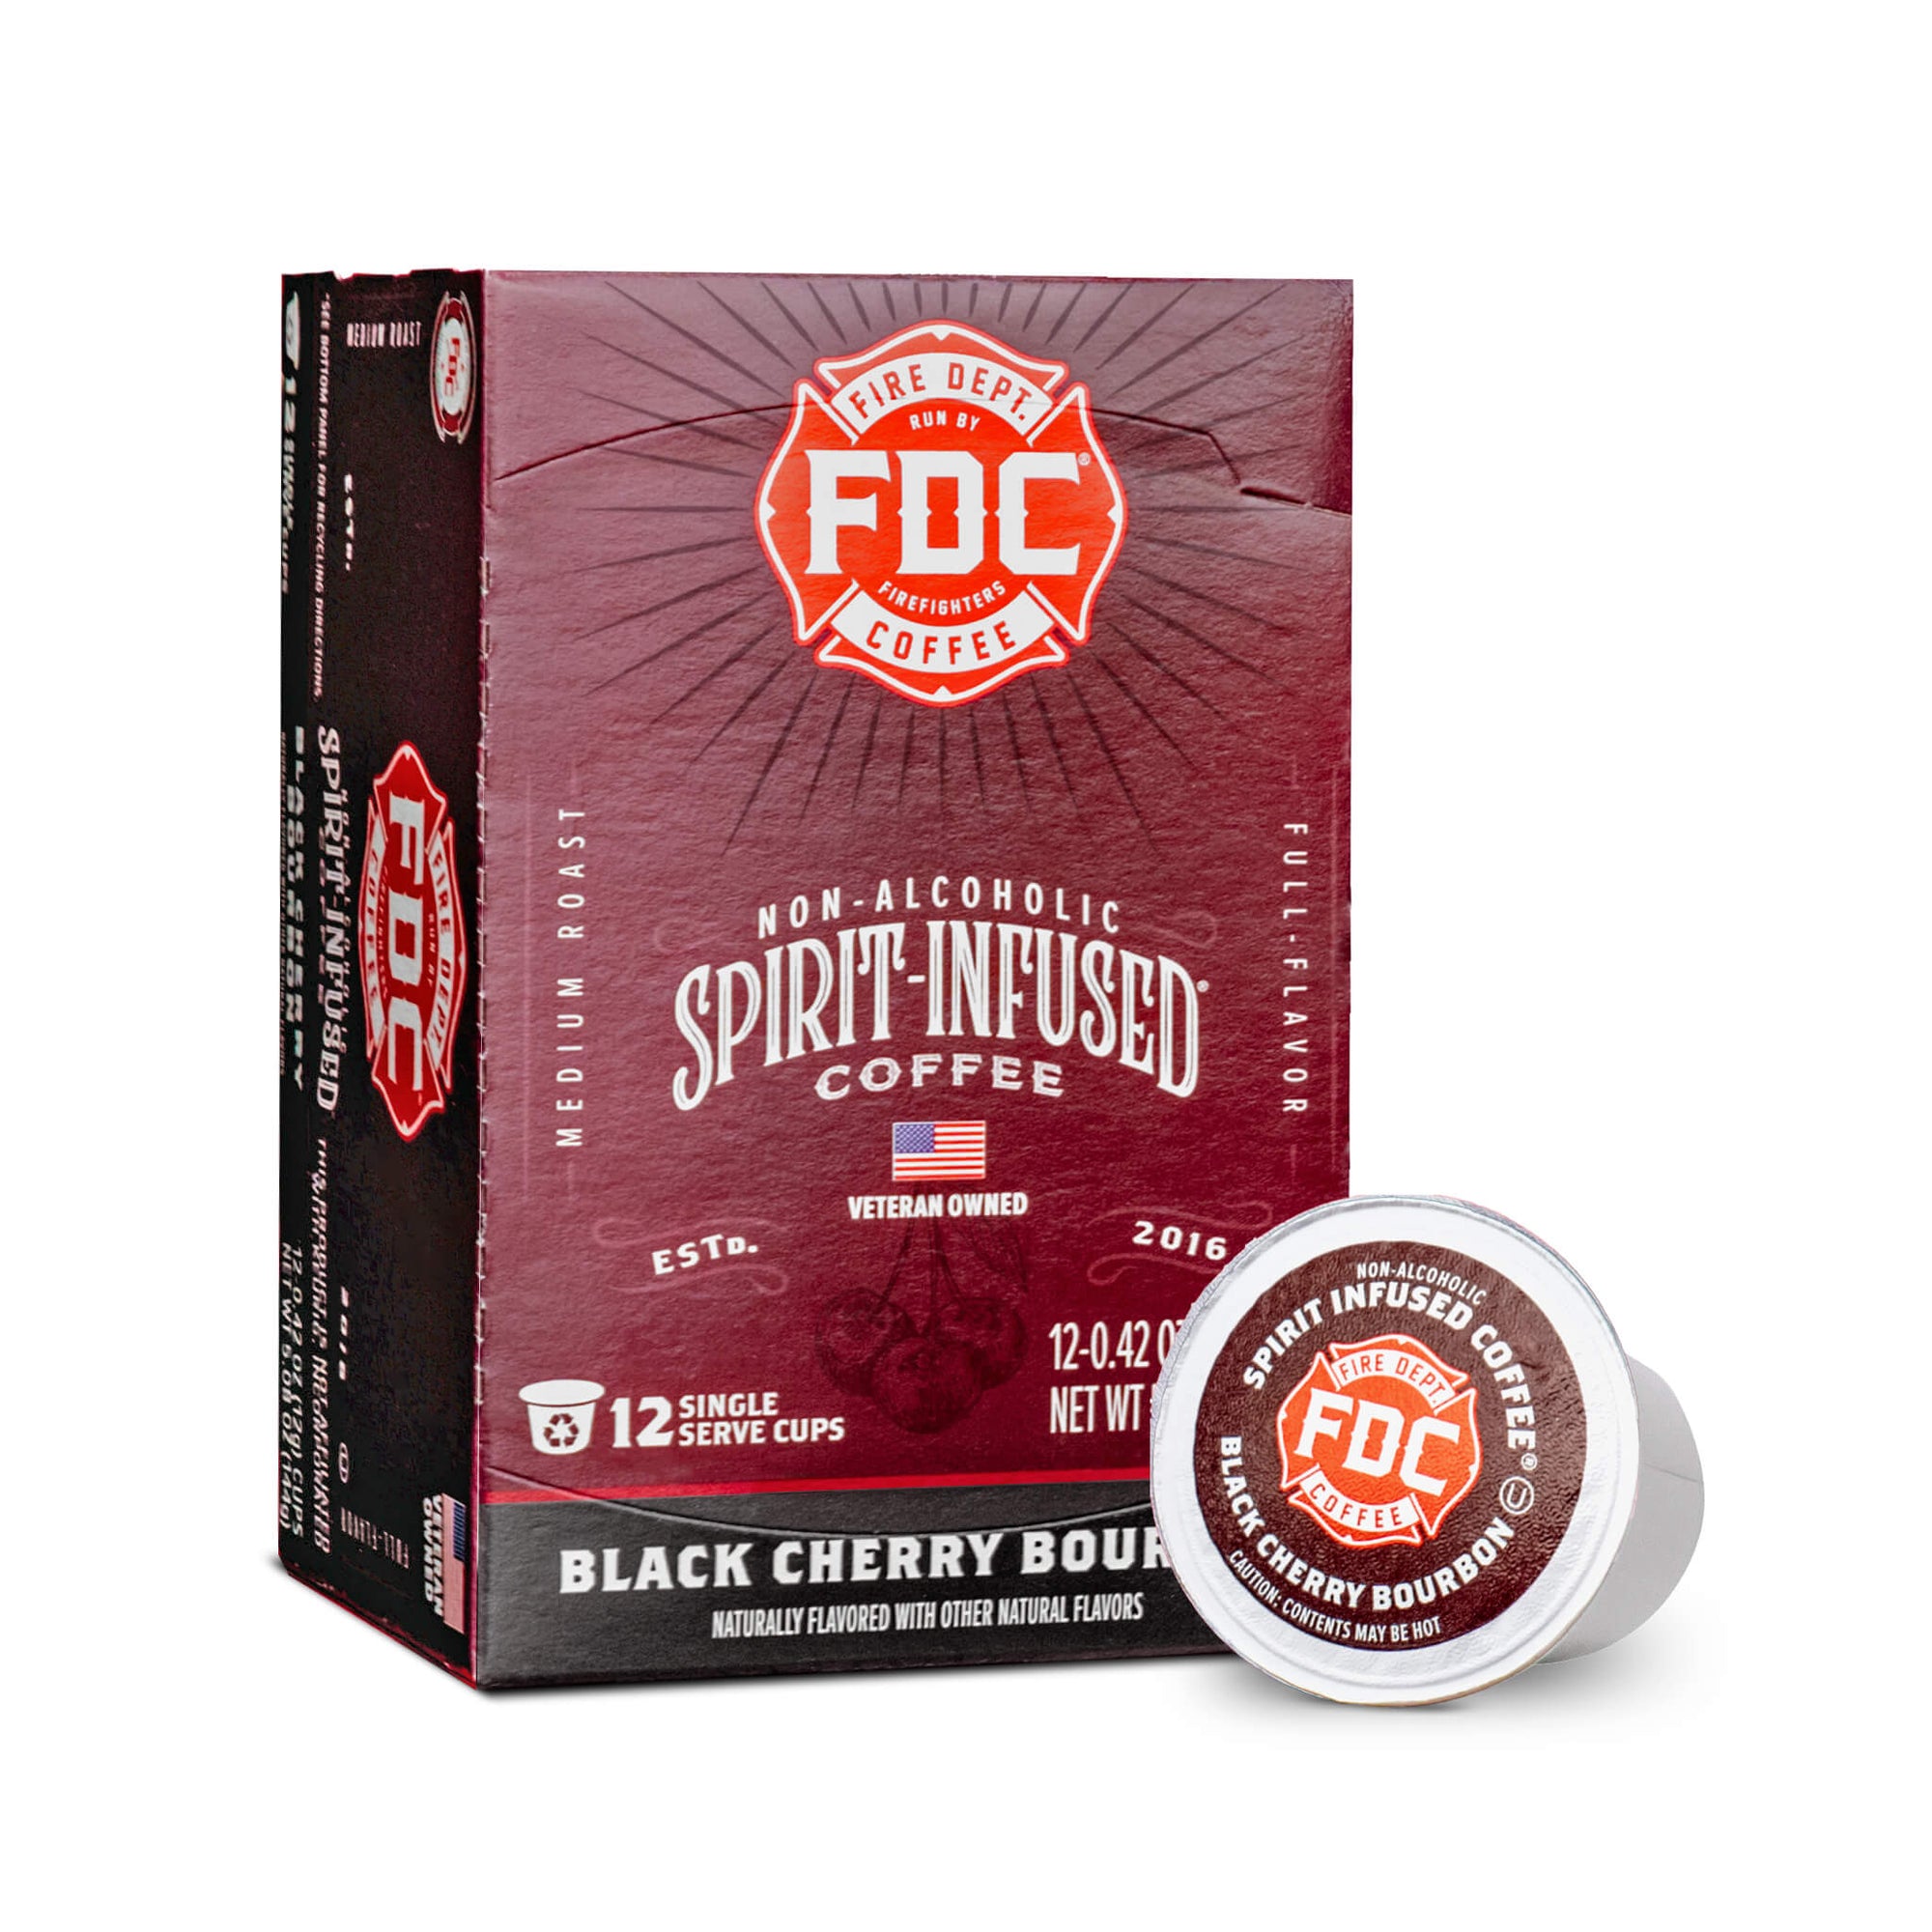 An image of the front of a box of Black Cherry Bourbon Infused Coffee Pods.